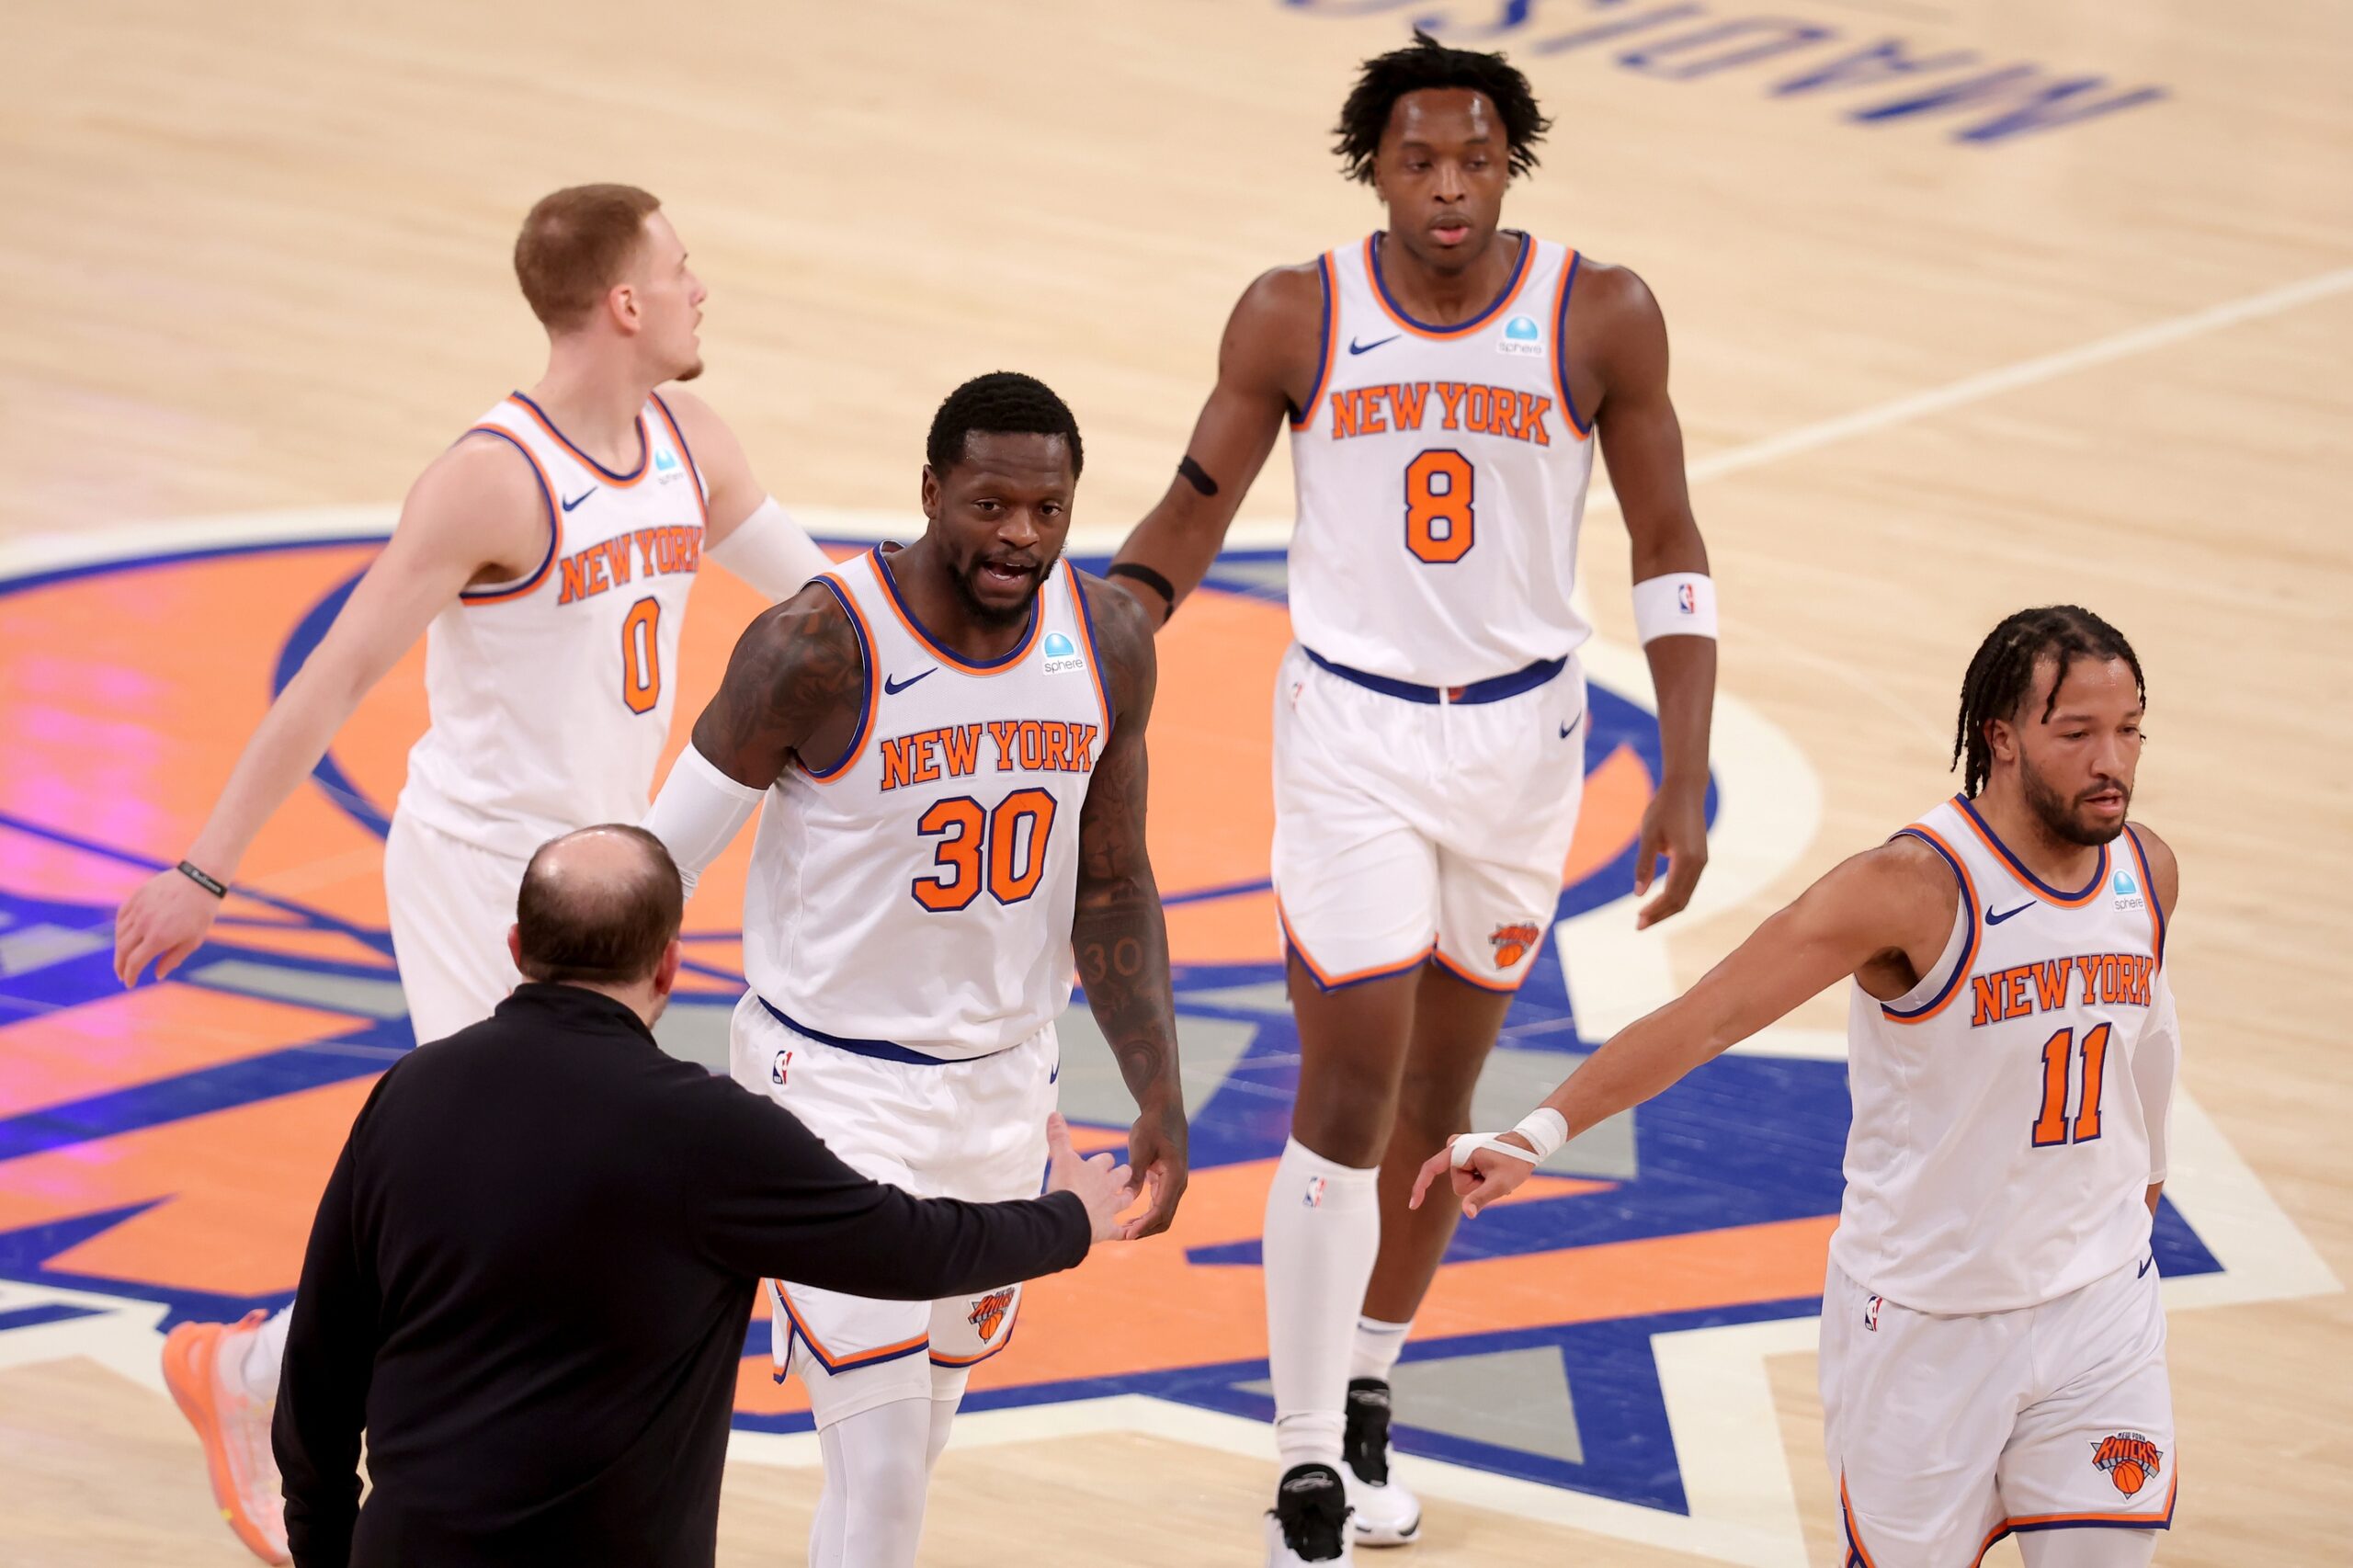 New York Knicks and Tom Thibodeau are harping on defense after NBA rule changes.